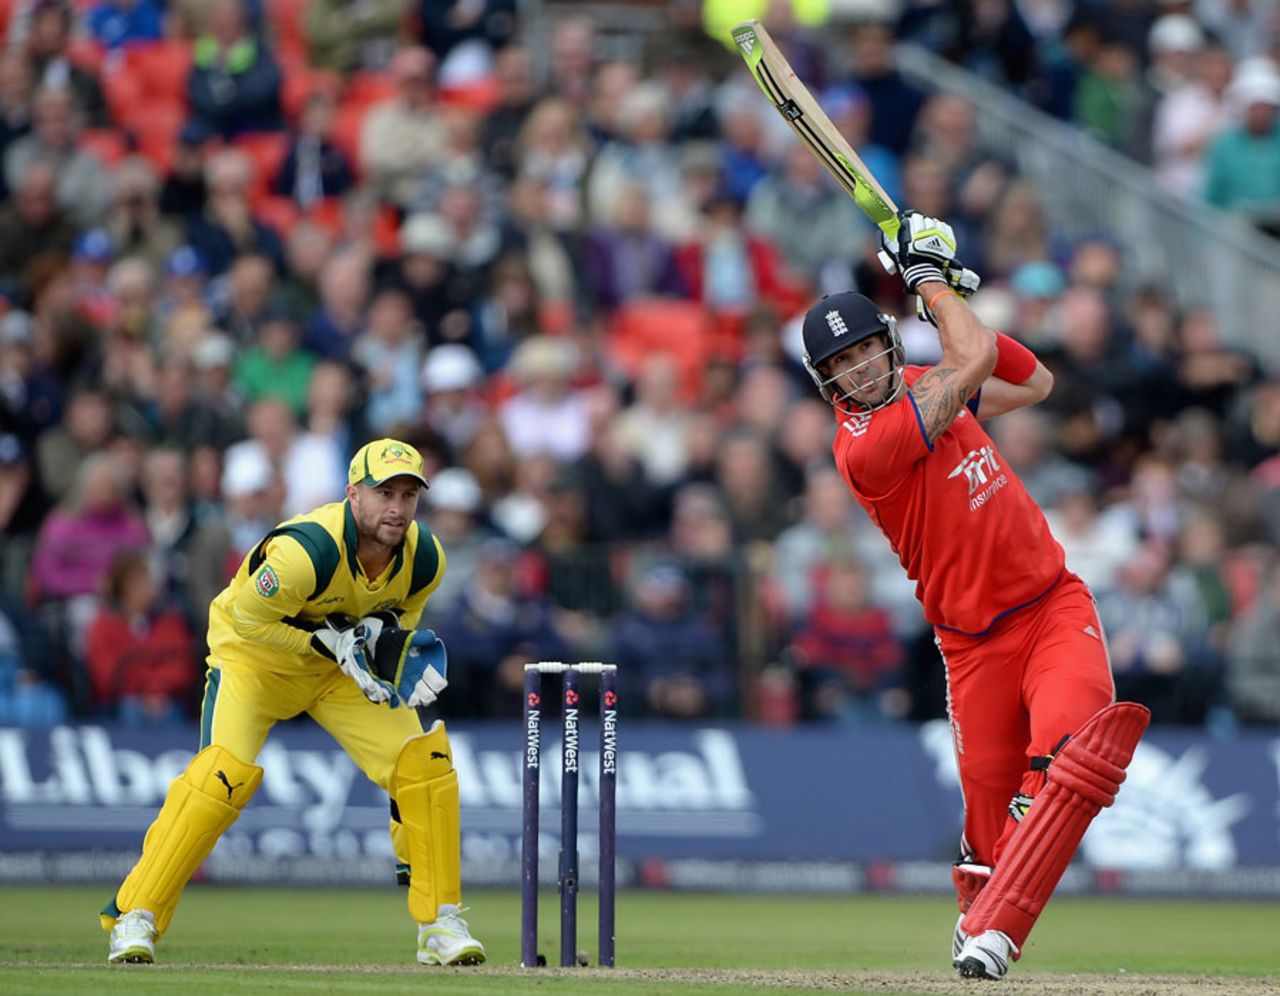 After a quiet start, Kevin Pietersen looked to dominate, England v Australia, 2nd NatWest ODI, Old Trafford, September 8, 2013